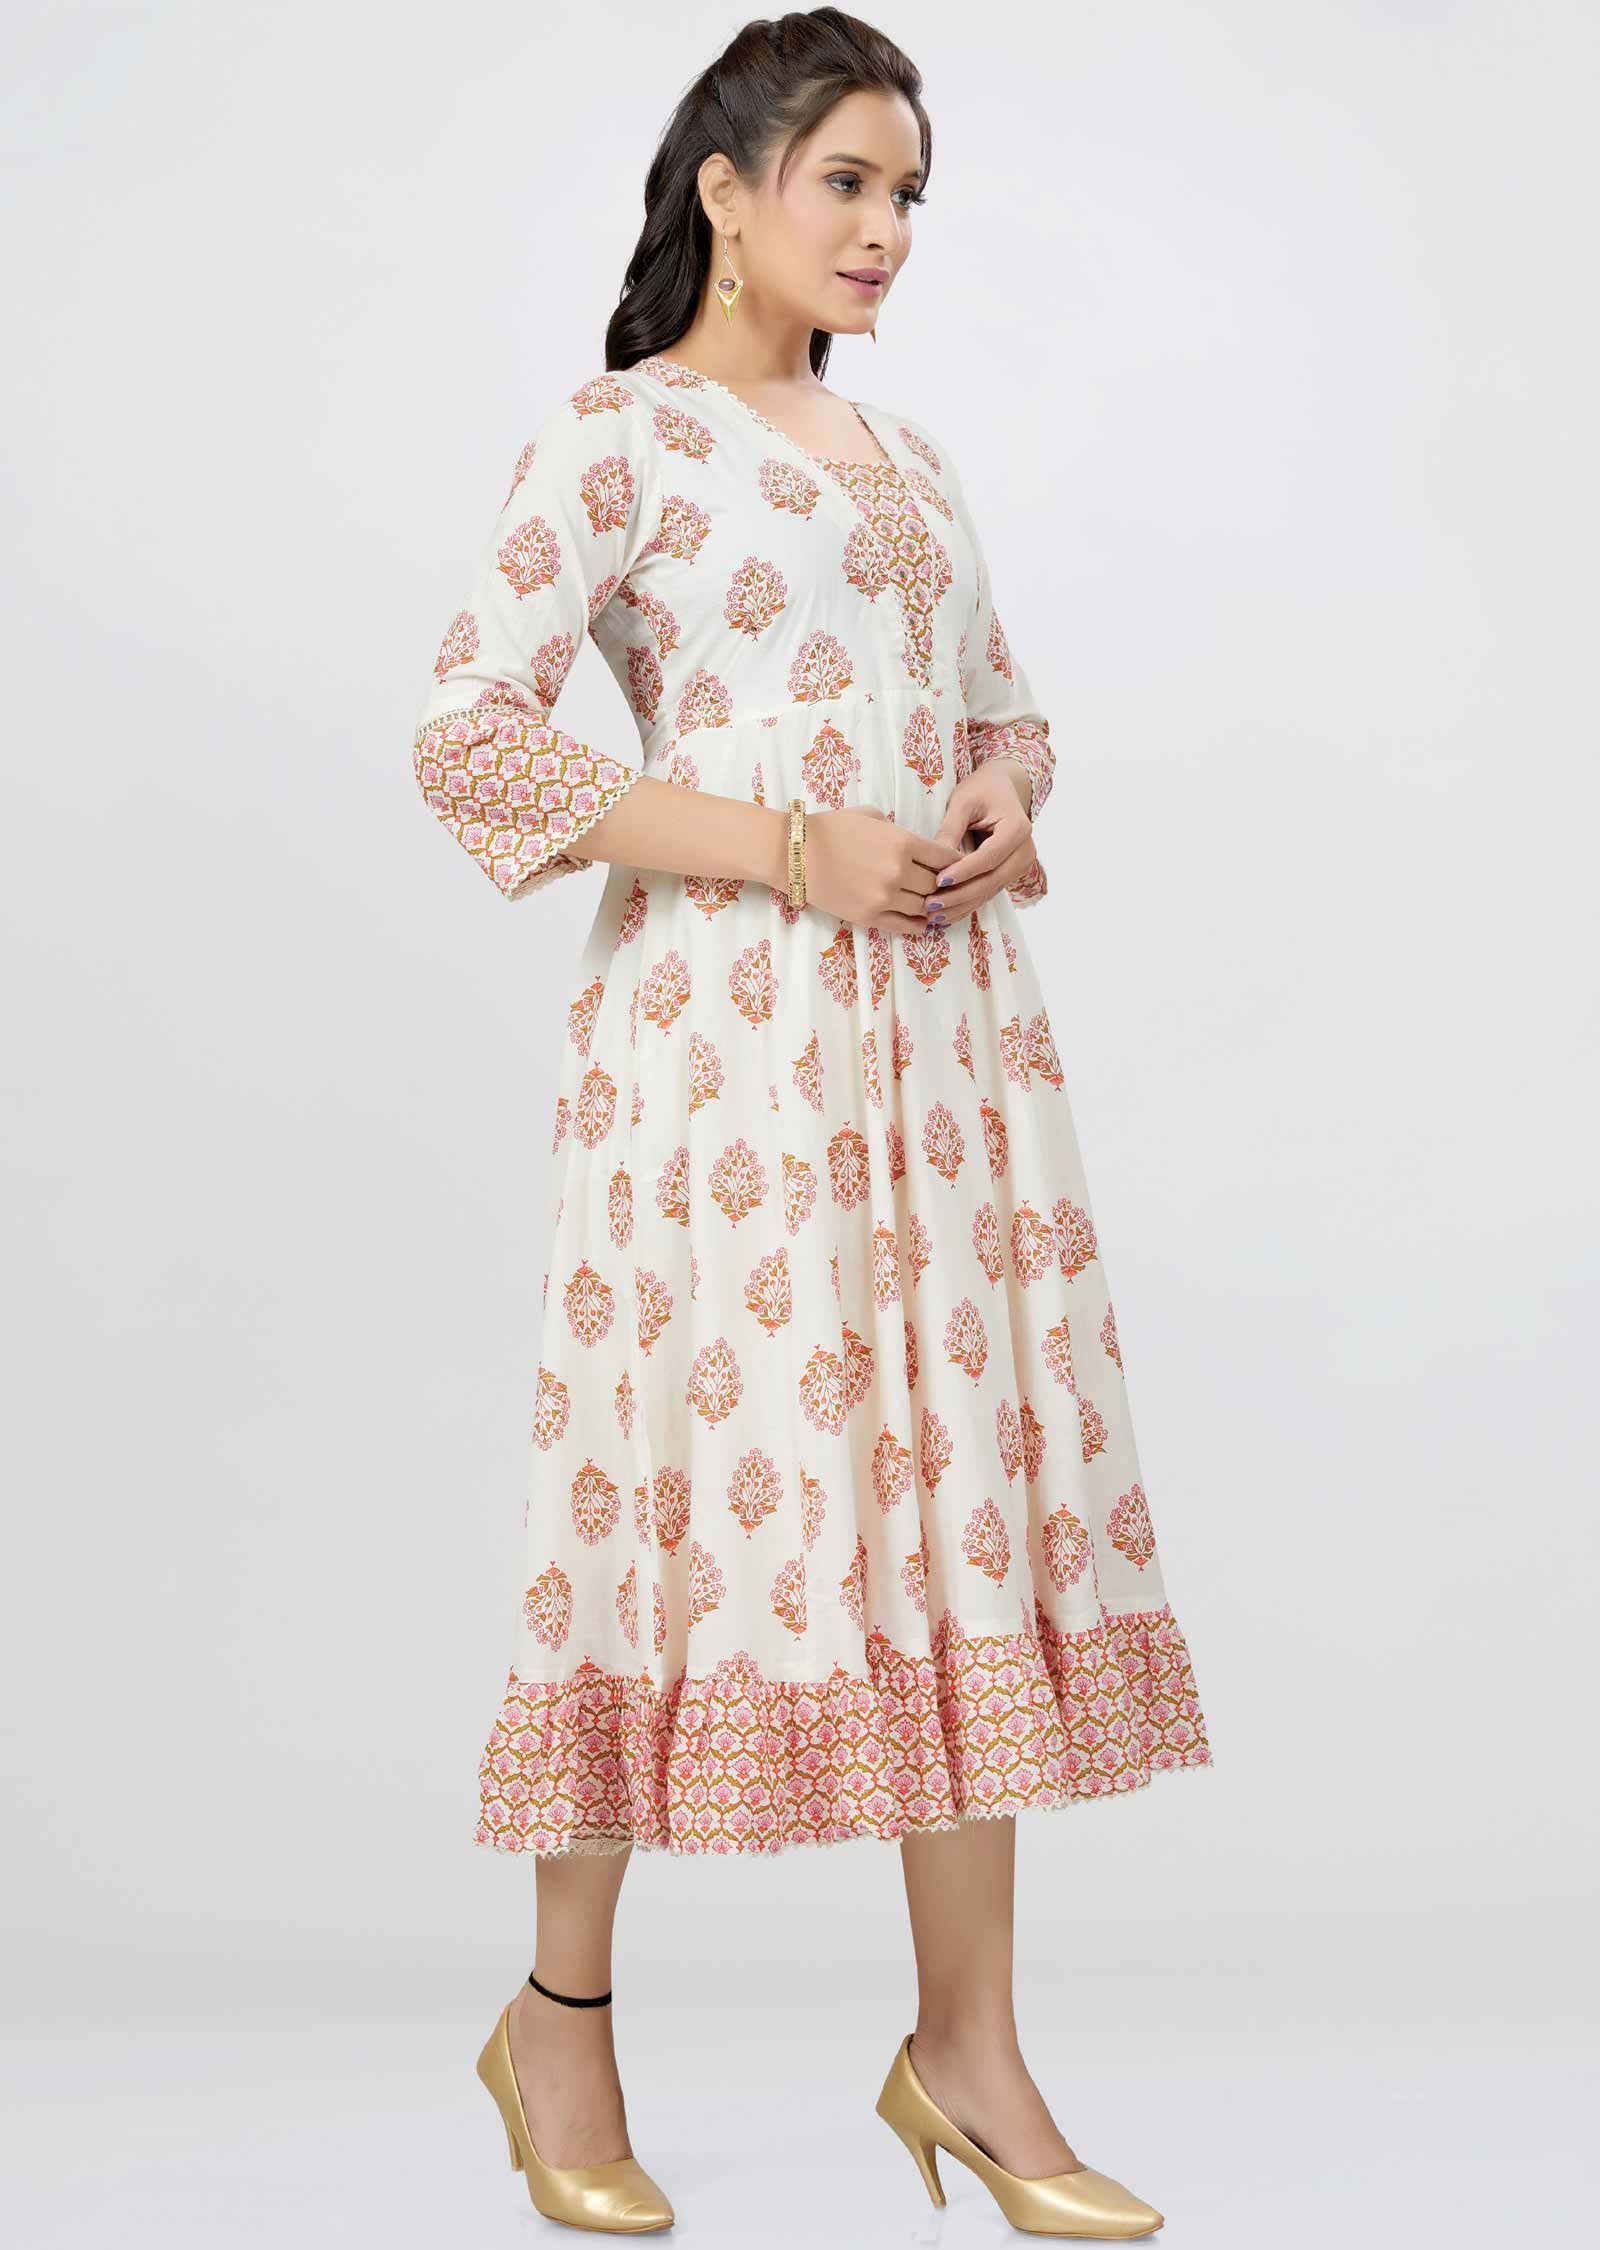 Off White Cotton Sequins Frock Style Kurti